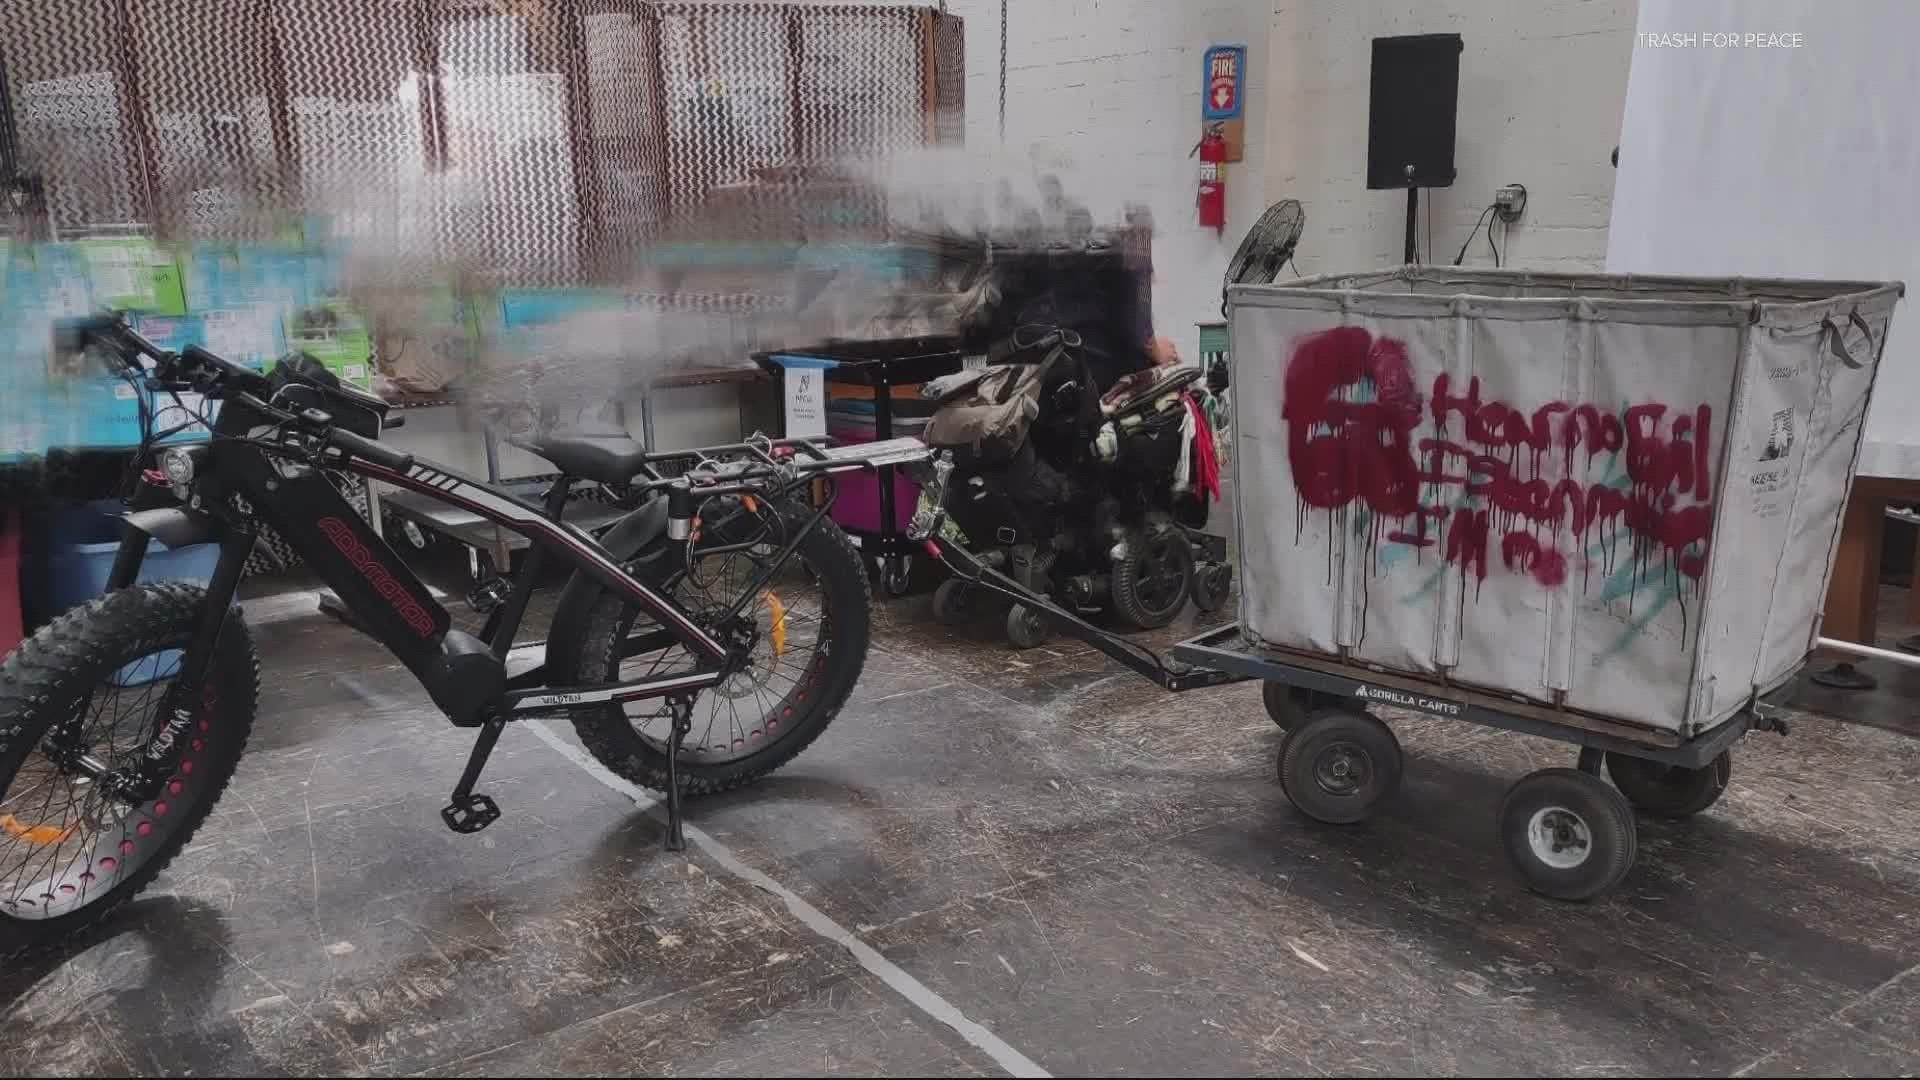 ‘Trash for Peace’ picks up trash around the city using an e-bike and trailer. But they’ve had to pause operations after someone stole the bike last week.